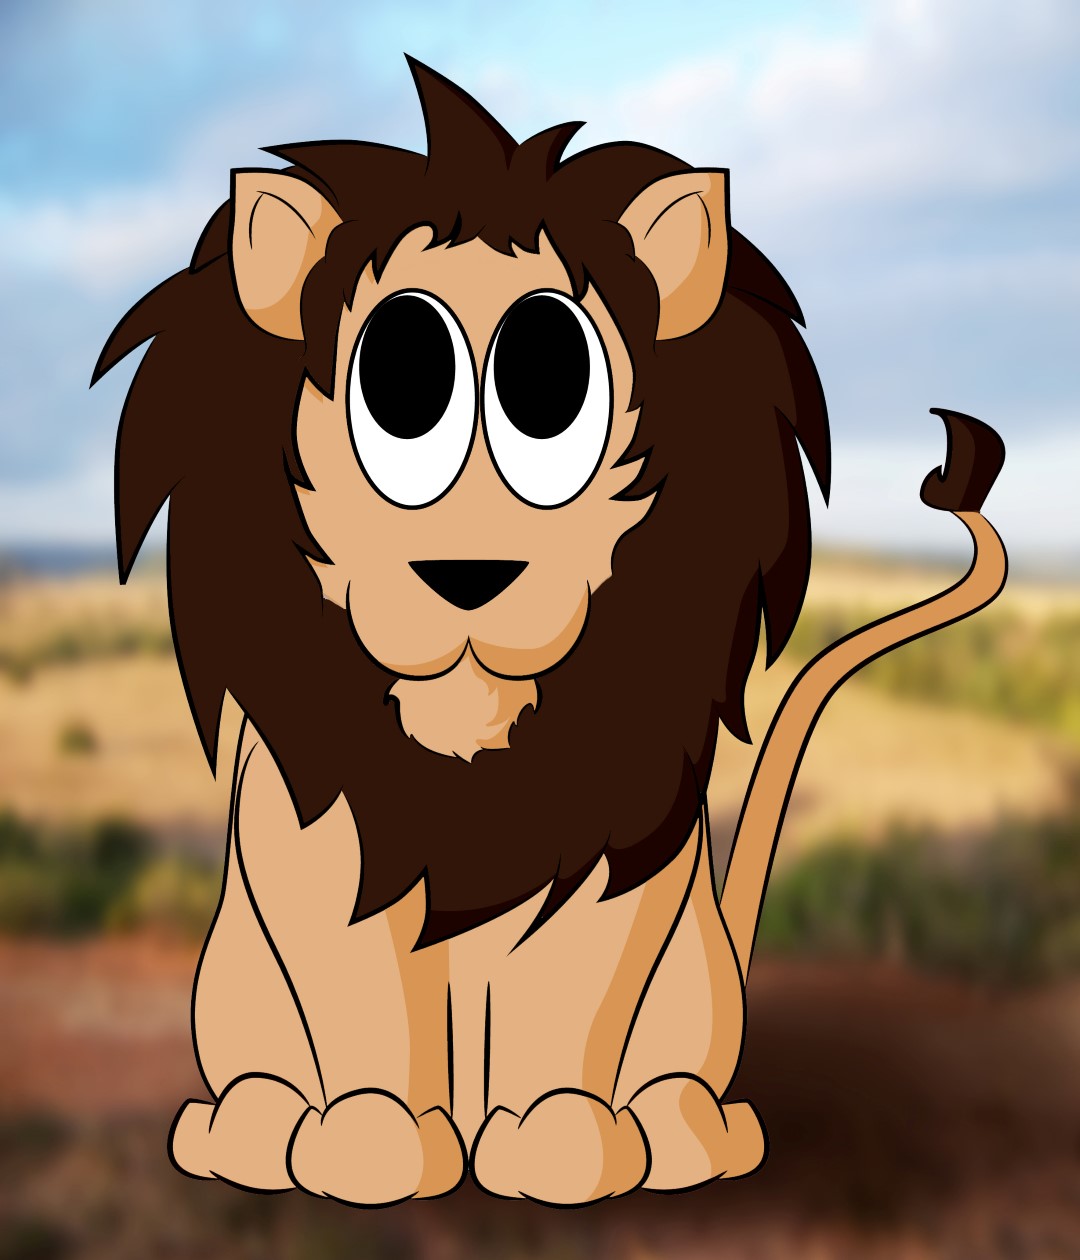 How To Draw A Cartoon Lion - Draw Central